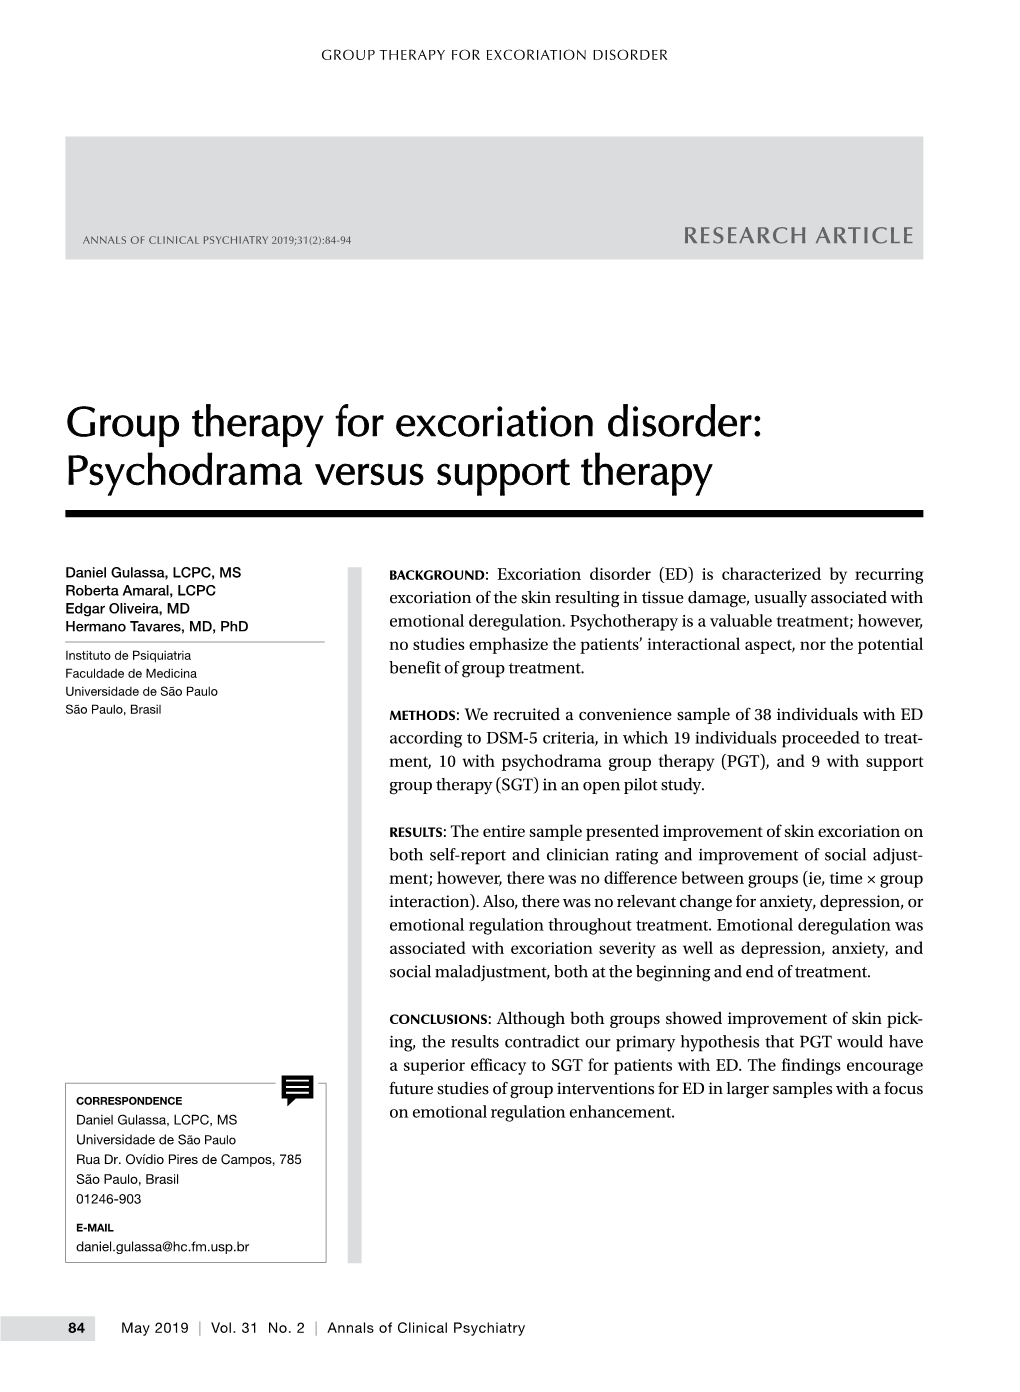 Group Therapy for Excoriation Disorder